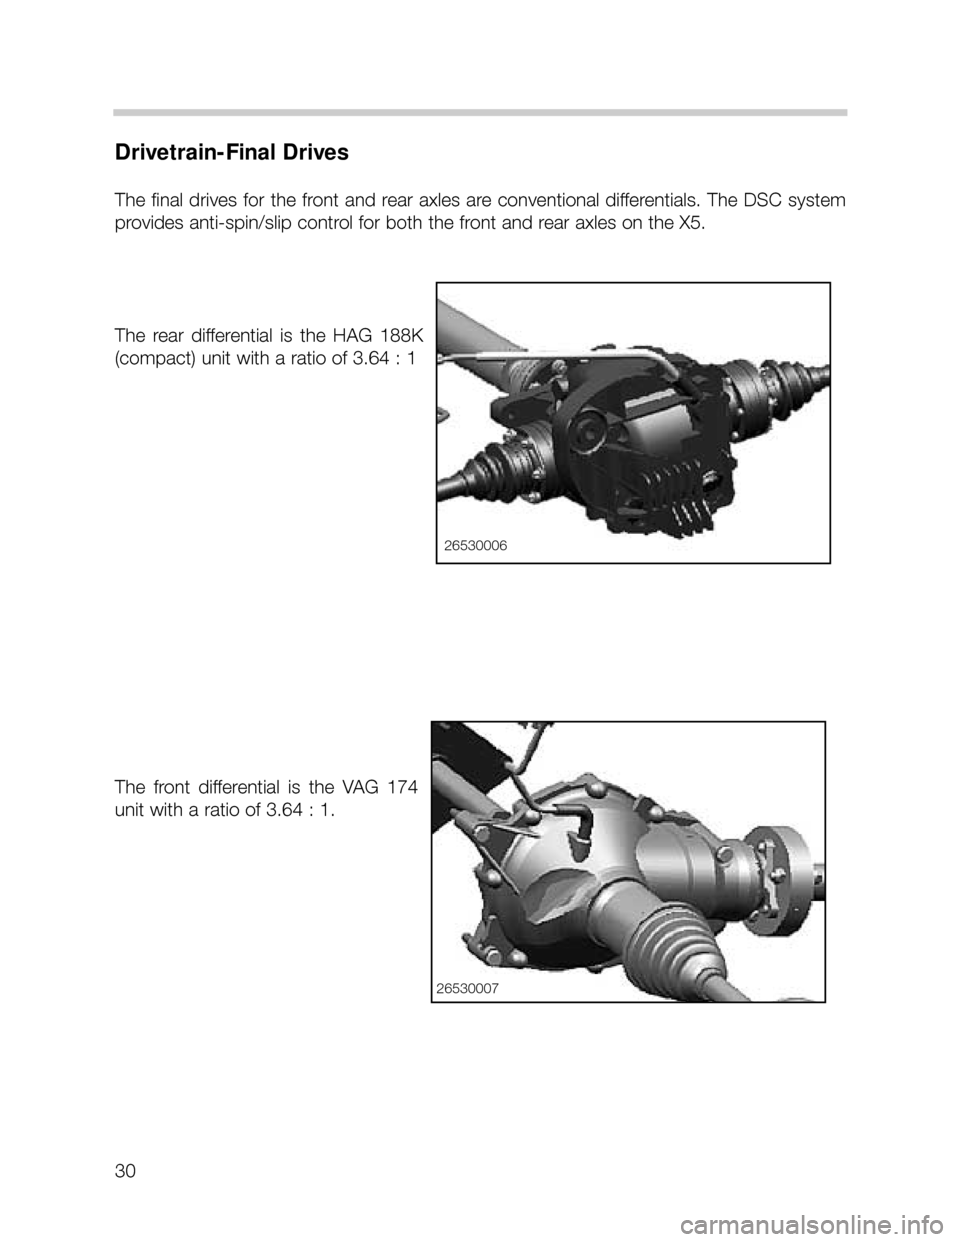 BMW X5 2002 E53 Owners Manual 30
Drivetrain-Final Drives
The final drives for the front and rear axles are conventional differentials. The DSC system
provides anti-spin/slip control for both the front and rear axles on the X5.
The